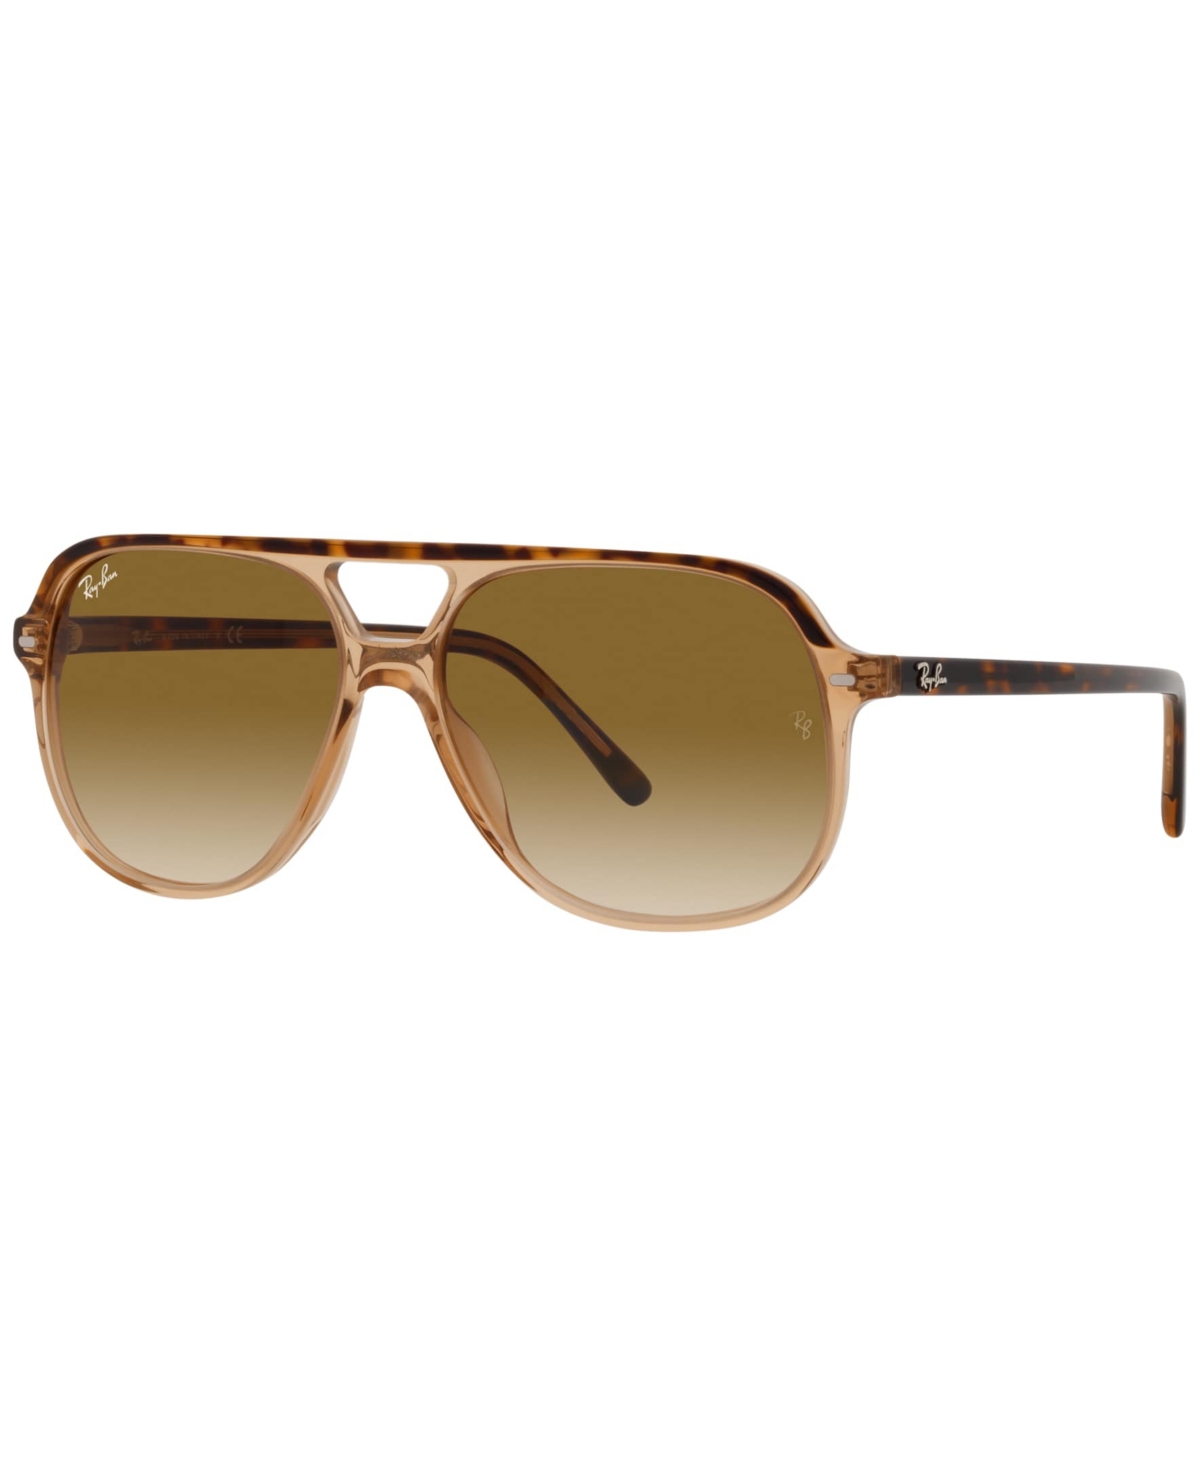 Shop Ray Ban Unisex Sunglasses, Rb2198 Bill In Havana On Transparent Brown